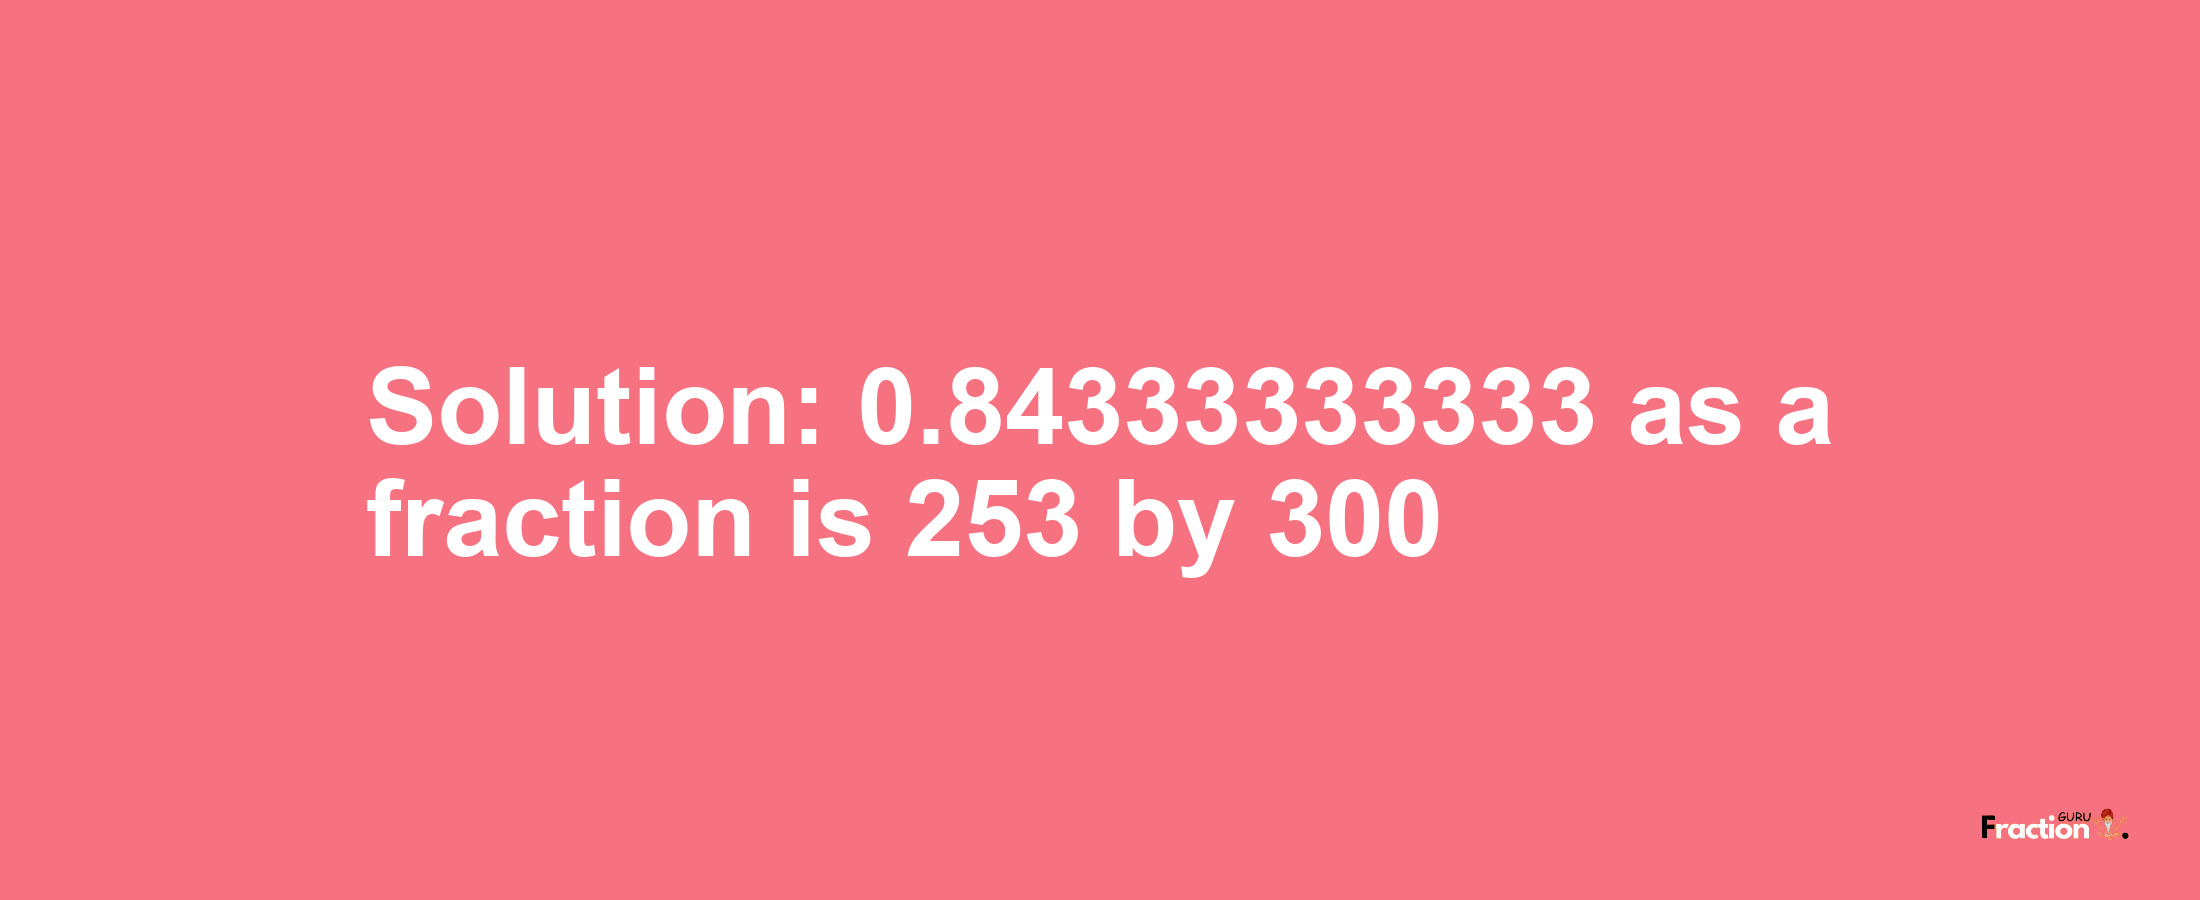 Solution:0.84333333333 as a fraction is 253/300